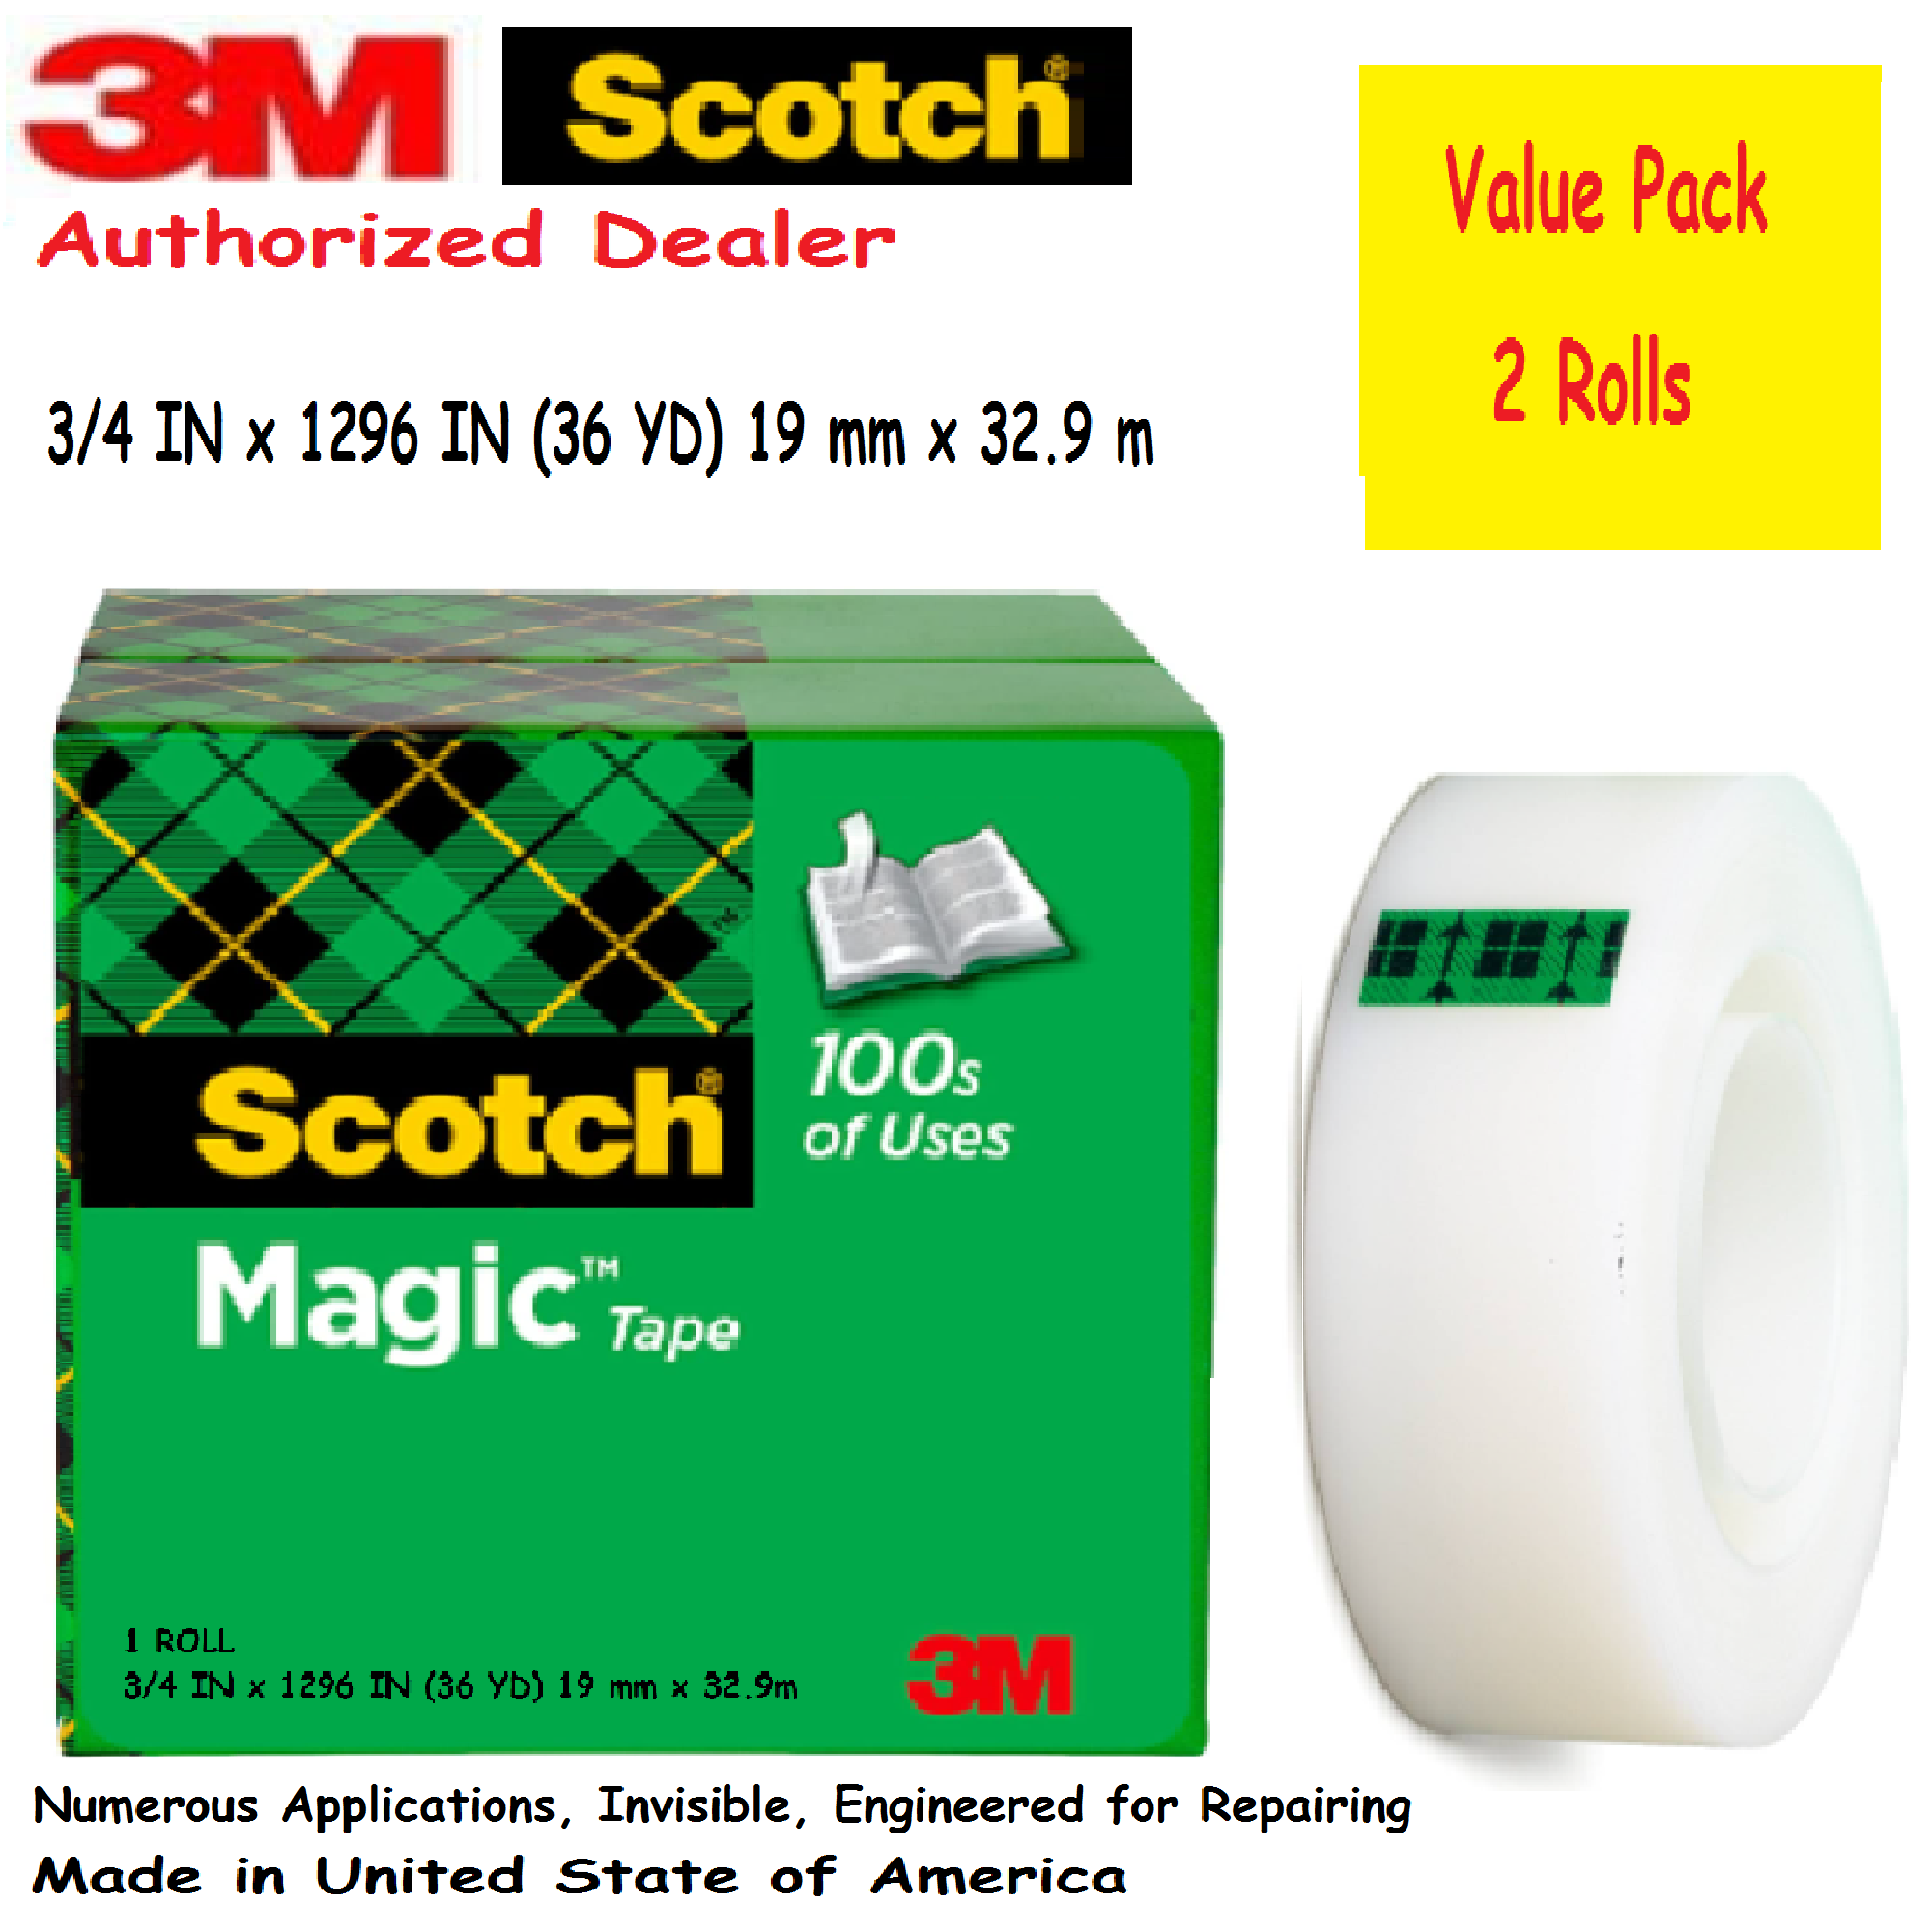 3M Scotch Magic Tape 2 Rolls Value Pack 19mm x 32.9mm Numerous  Applications, Invisible, Engineered for Repairing